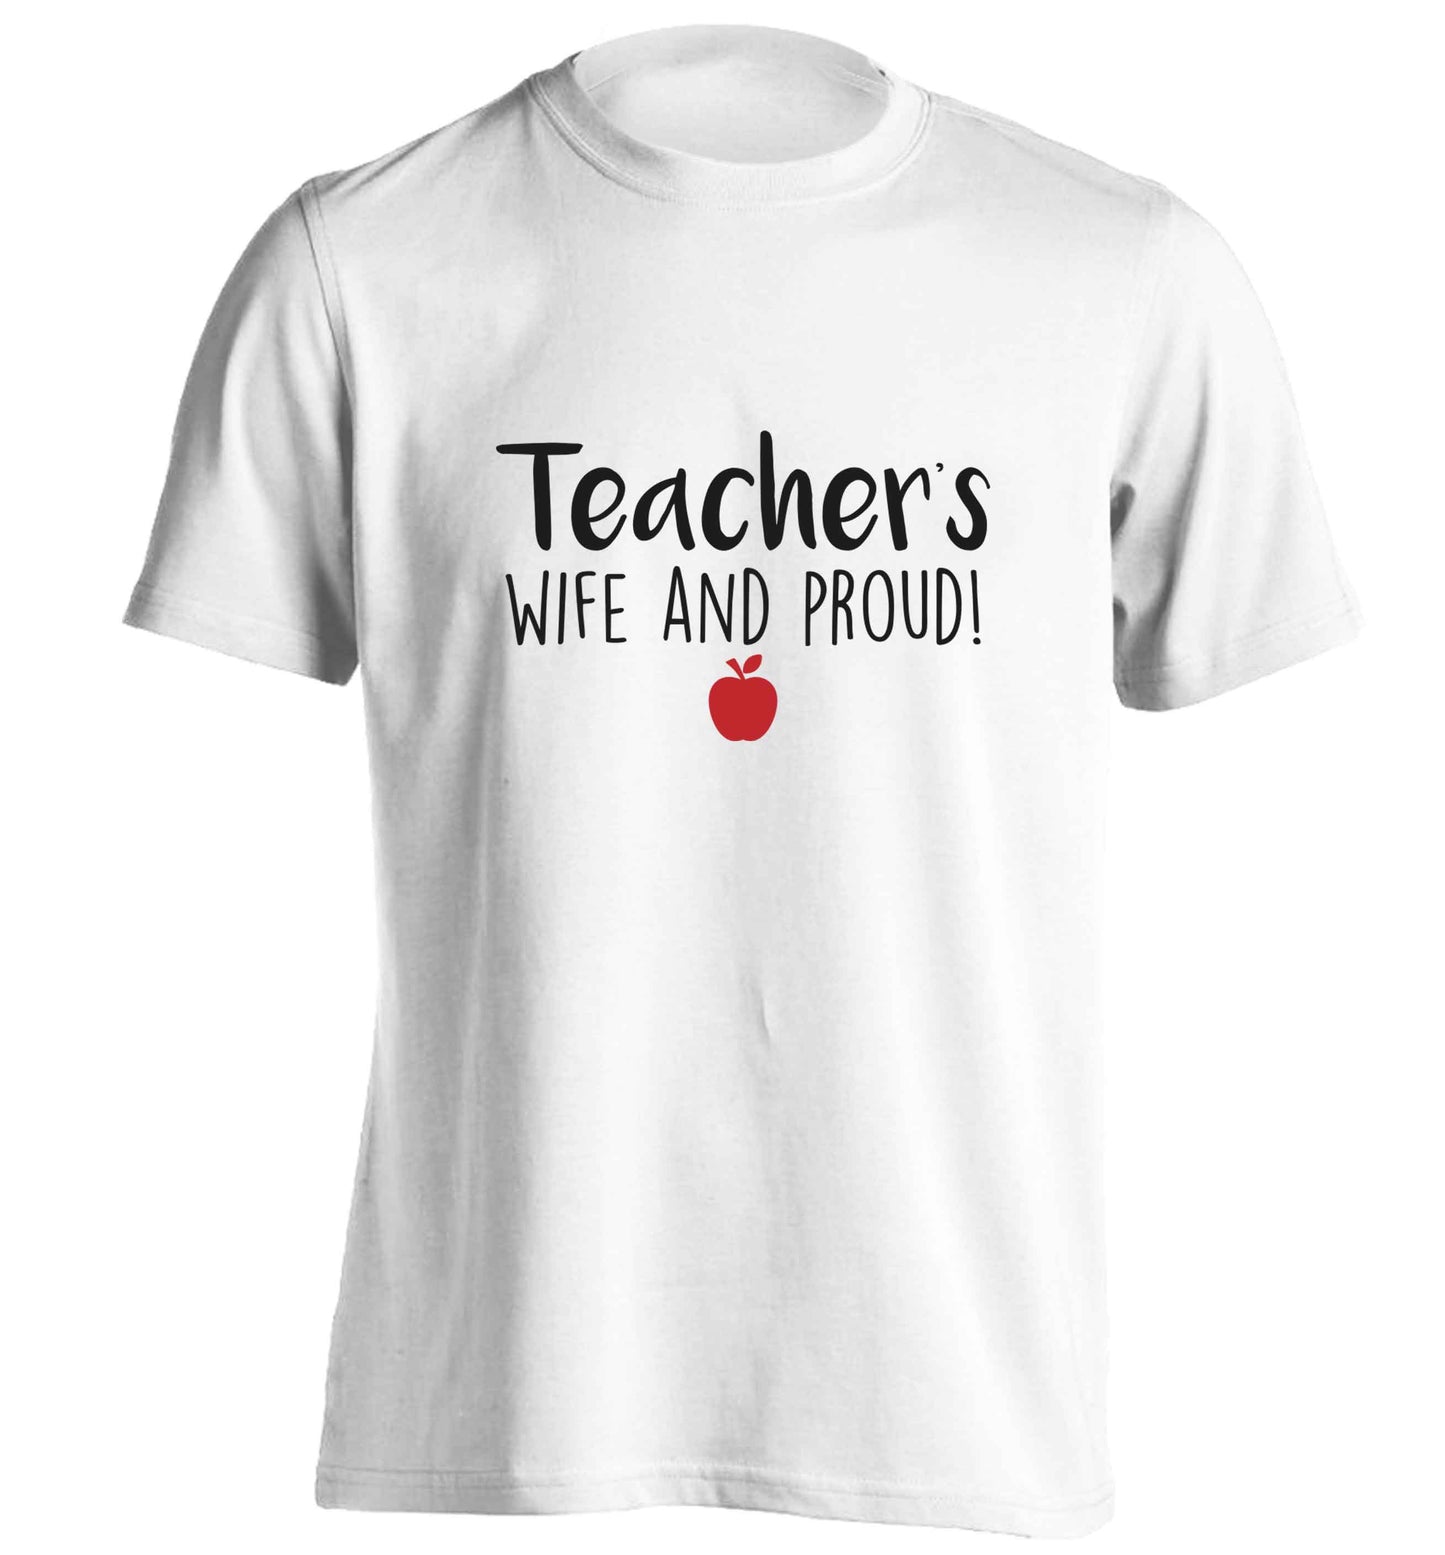 Teachers wife and proud adults unisex white Tshirt 2XL